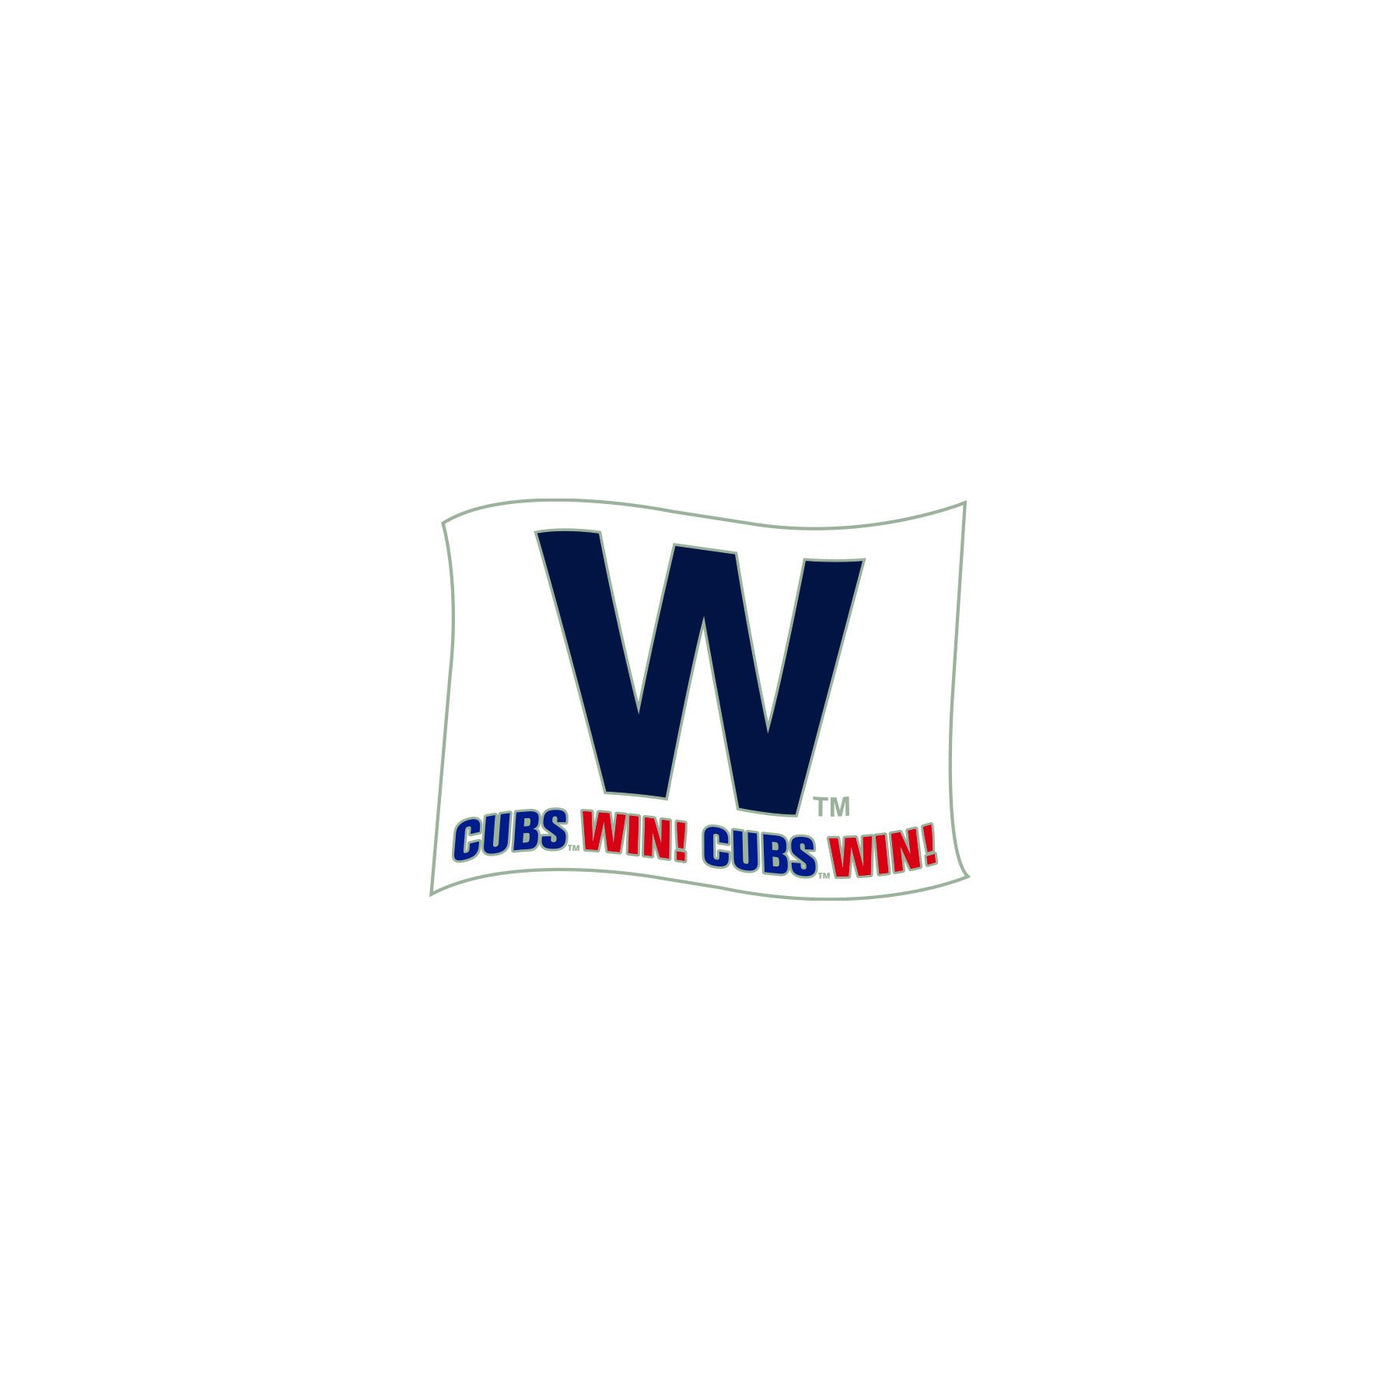 Chicago Cubs W WIN House Flag  Cubs w, Chicago cubs, Chicago cubs w flag